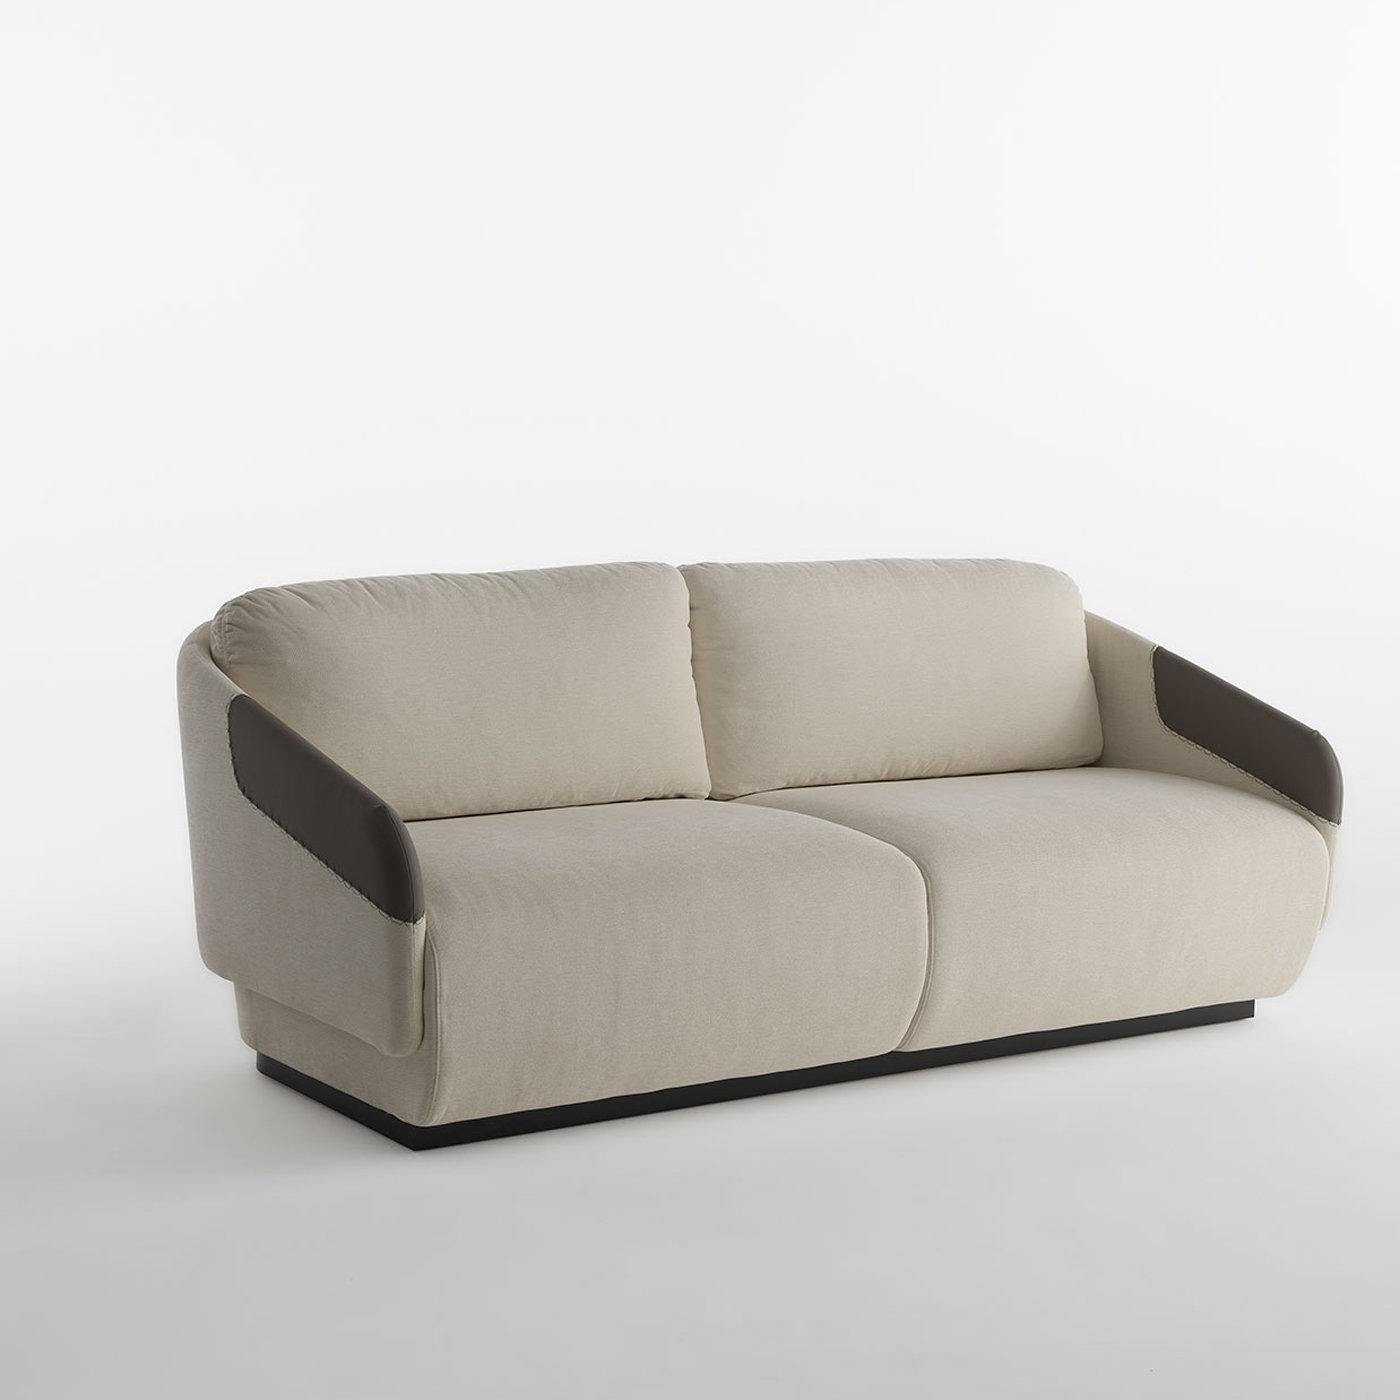 Part of the Worn collection, this two-seater sofa's essential silhouette and tailored details make it an absolute statement addition to a modern living room. The metal structure, reinforced with elastic belts, is padded with high-density